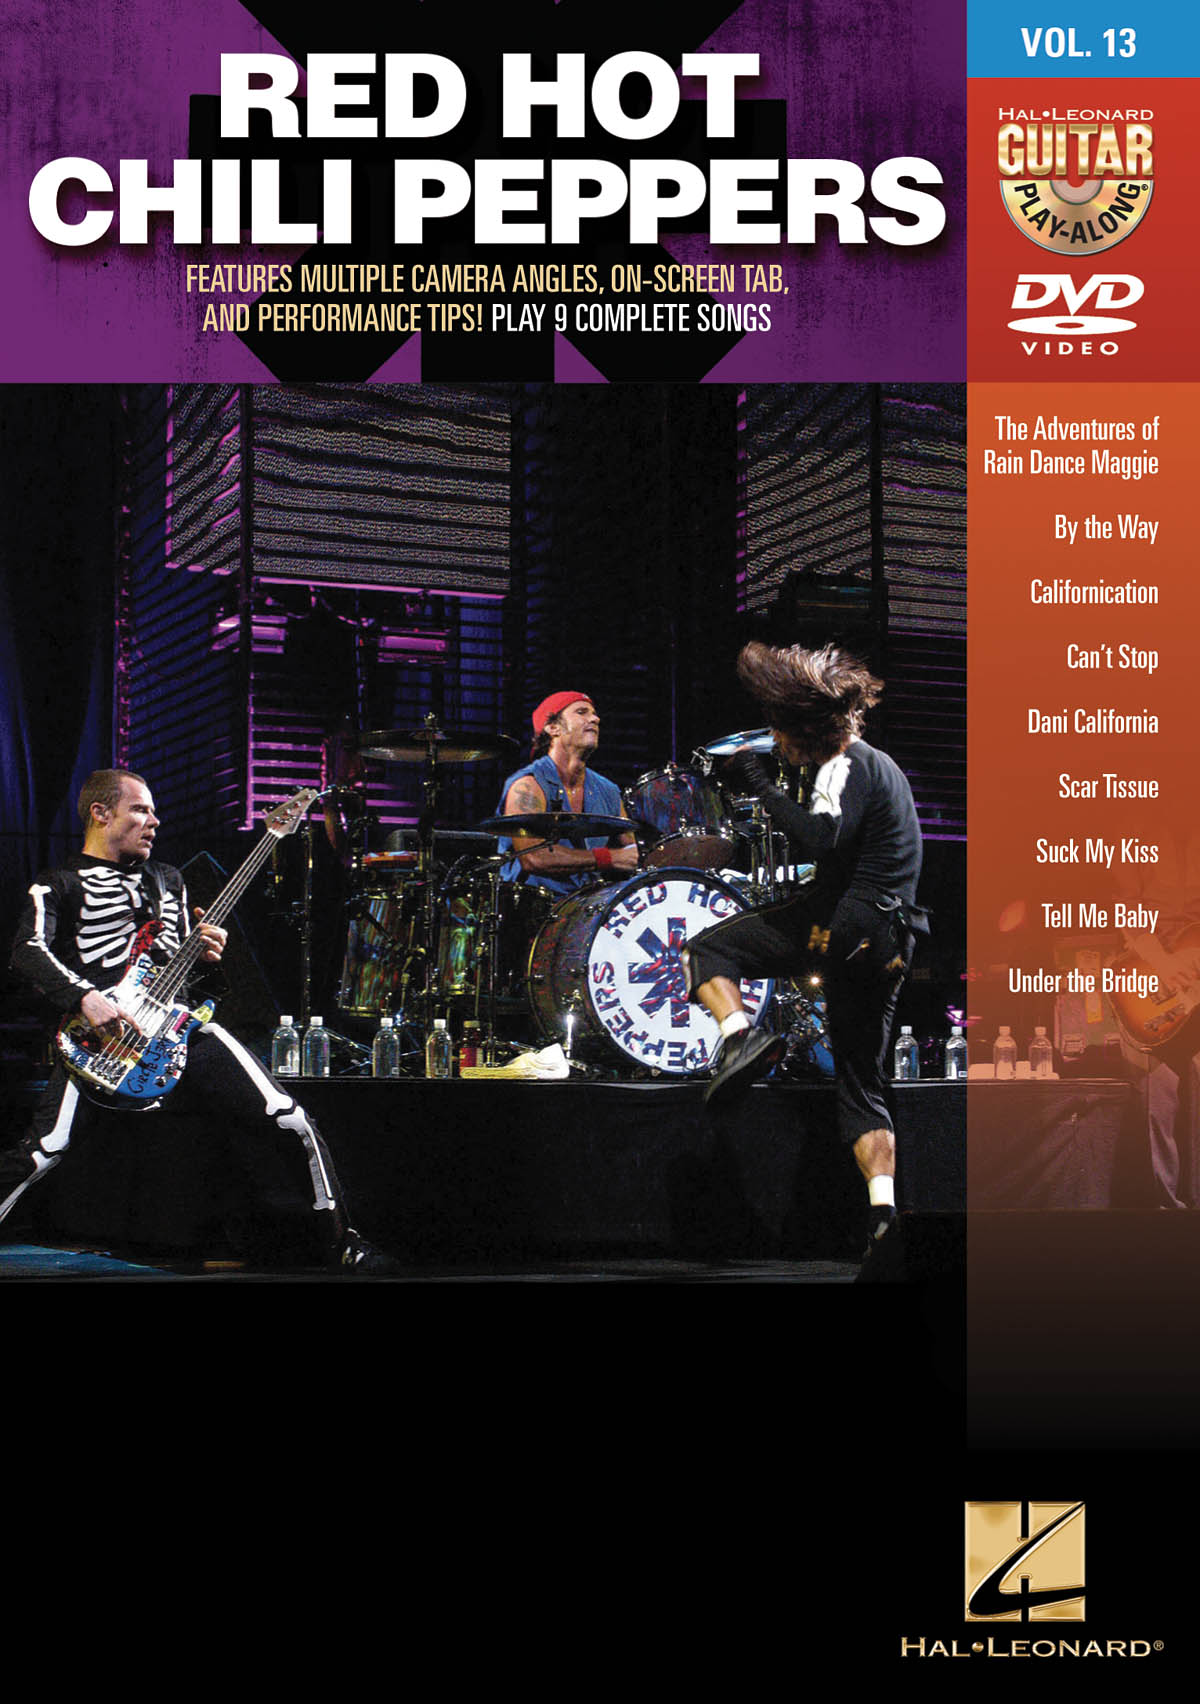 Red Hot Chili Peppers - Guitar Play-Along DVD Volume 13